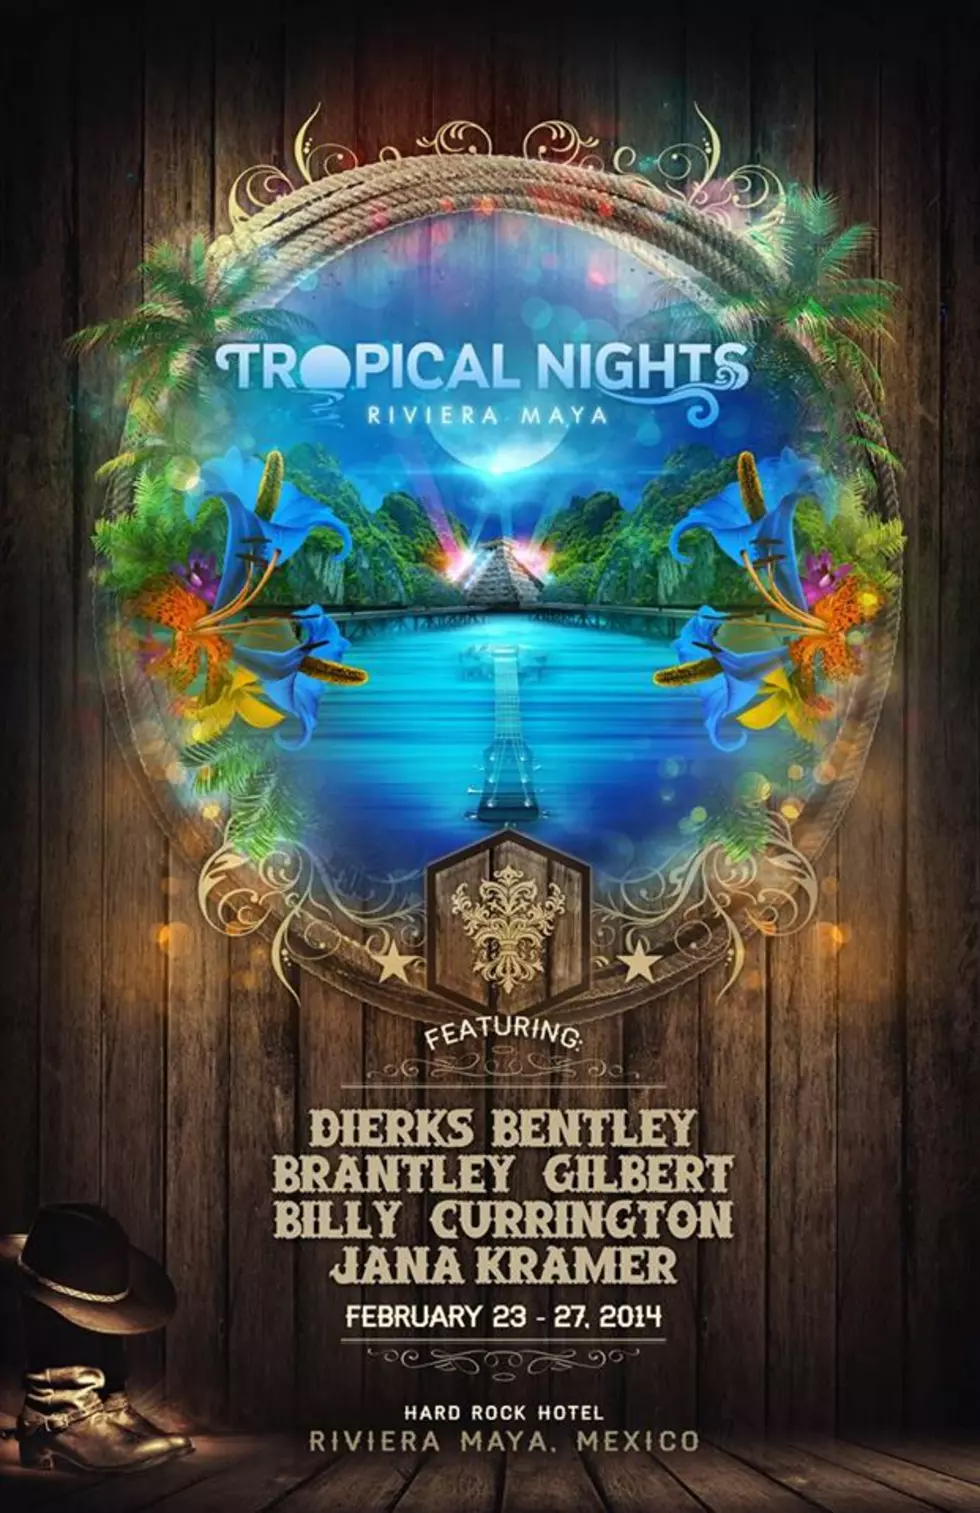 8 Songs You’ll Hear at Tropical Nights: Boots in the Sand